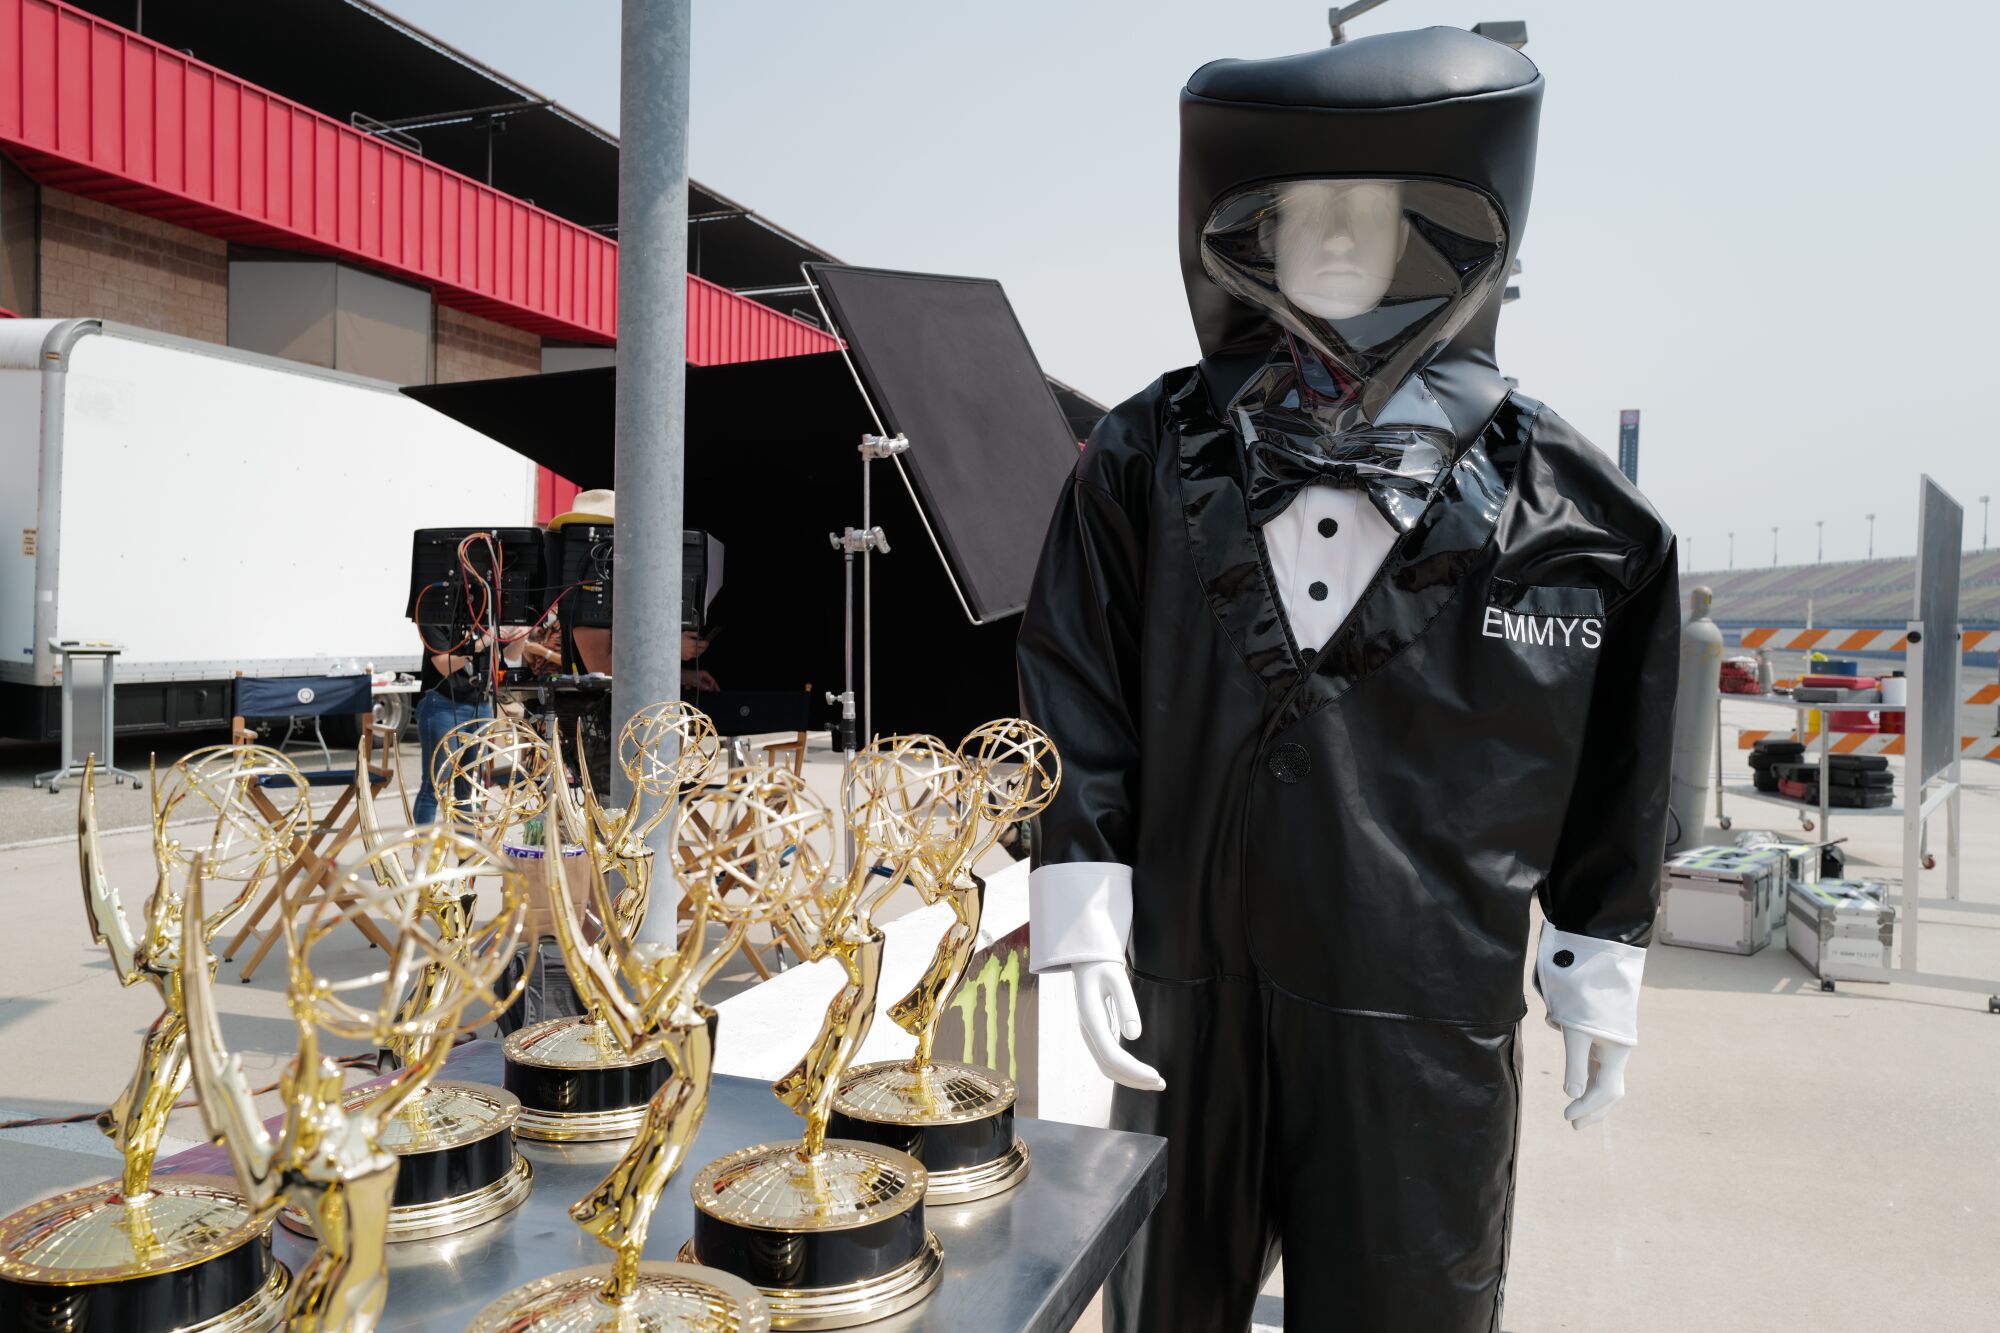 A mannequin in a hazmat tuxedo suit stands next to the Emmy statuettes 